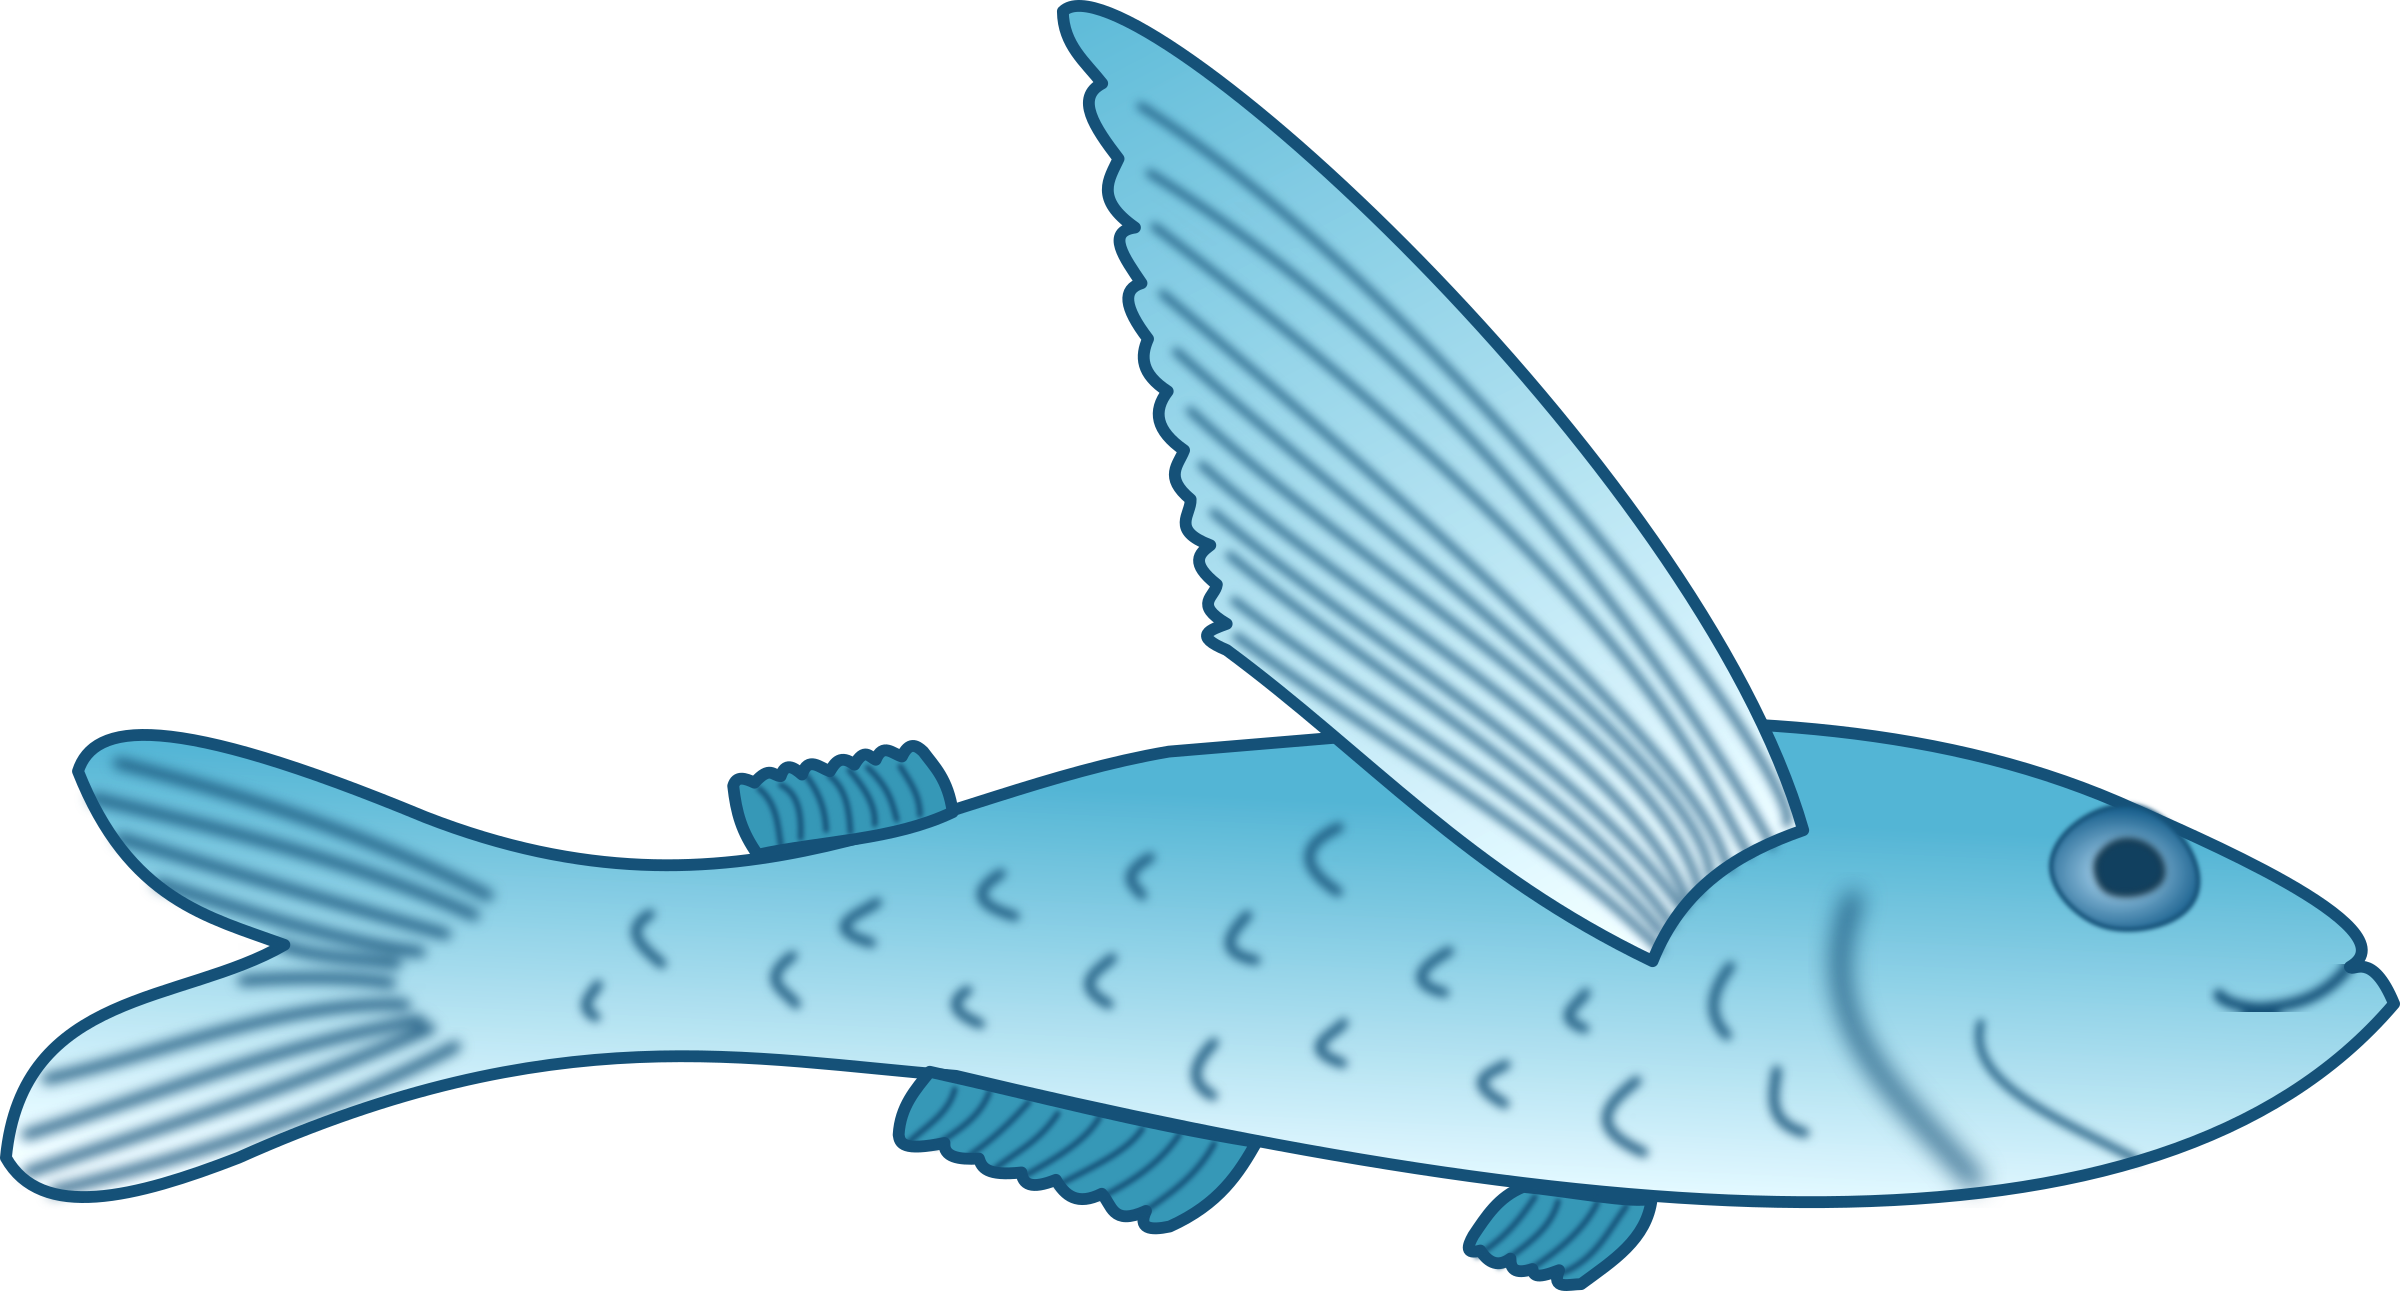 Download Flying Fish Vector Clipart image - Free stock photo - Public Domain photo - CC0 Images